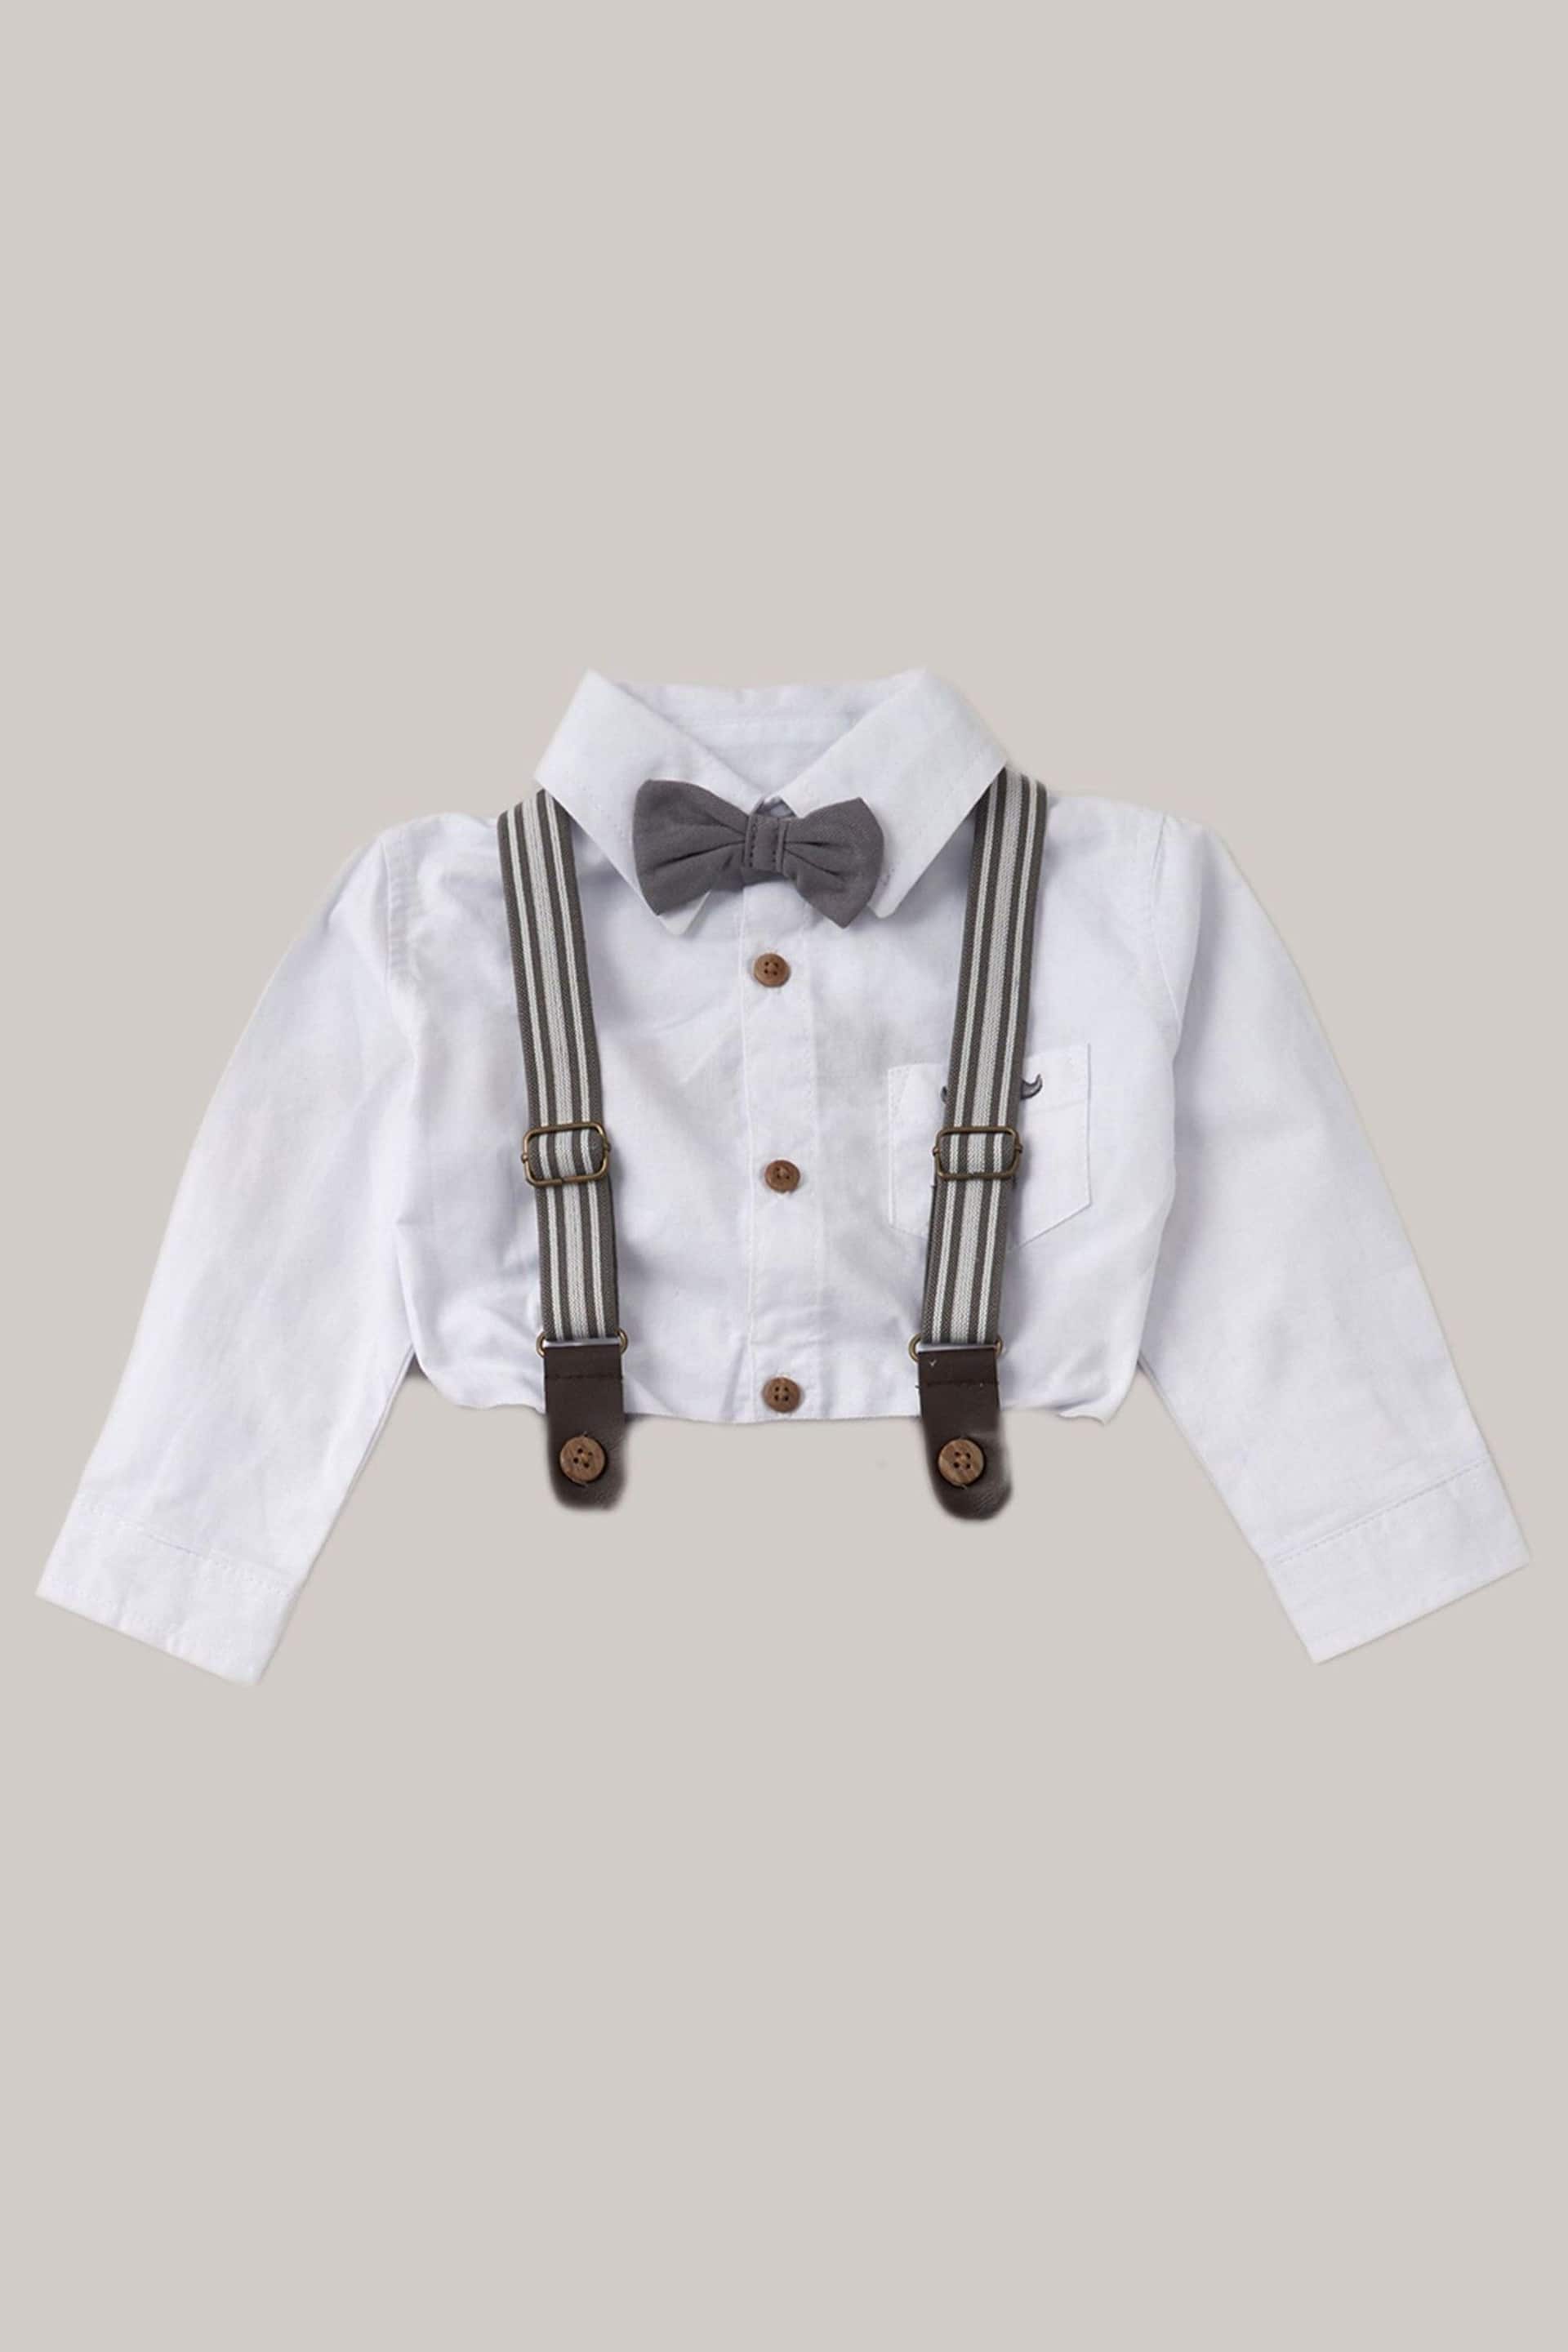 Little Gent Baby Mock Shirt Bodysuit and Braces Cotton Dungarees - Image 3 of 5